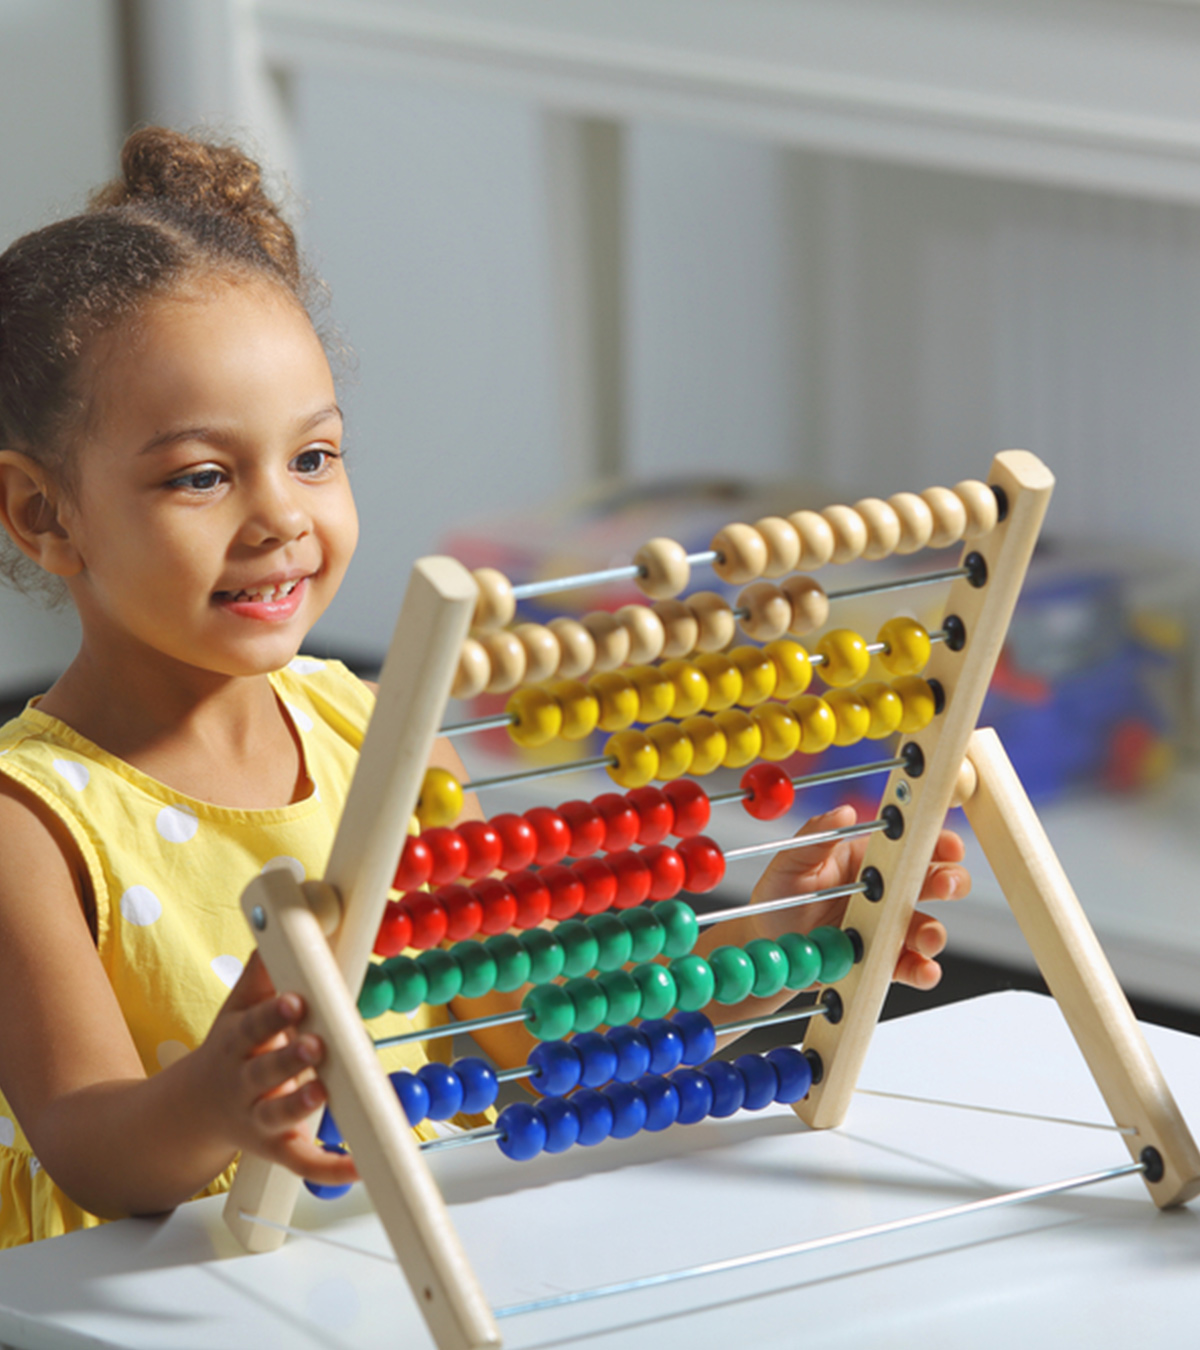 29 Easy And Fun Math Activities For Kids Aged 3 To 6 Years